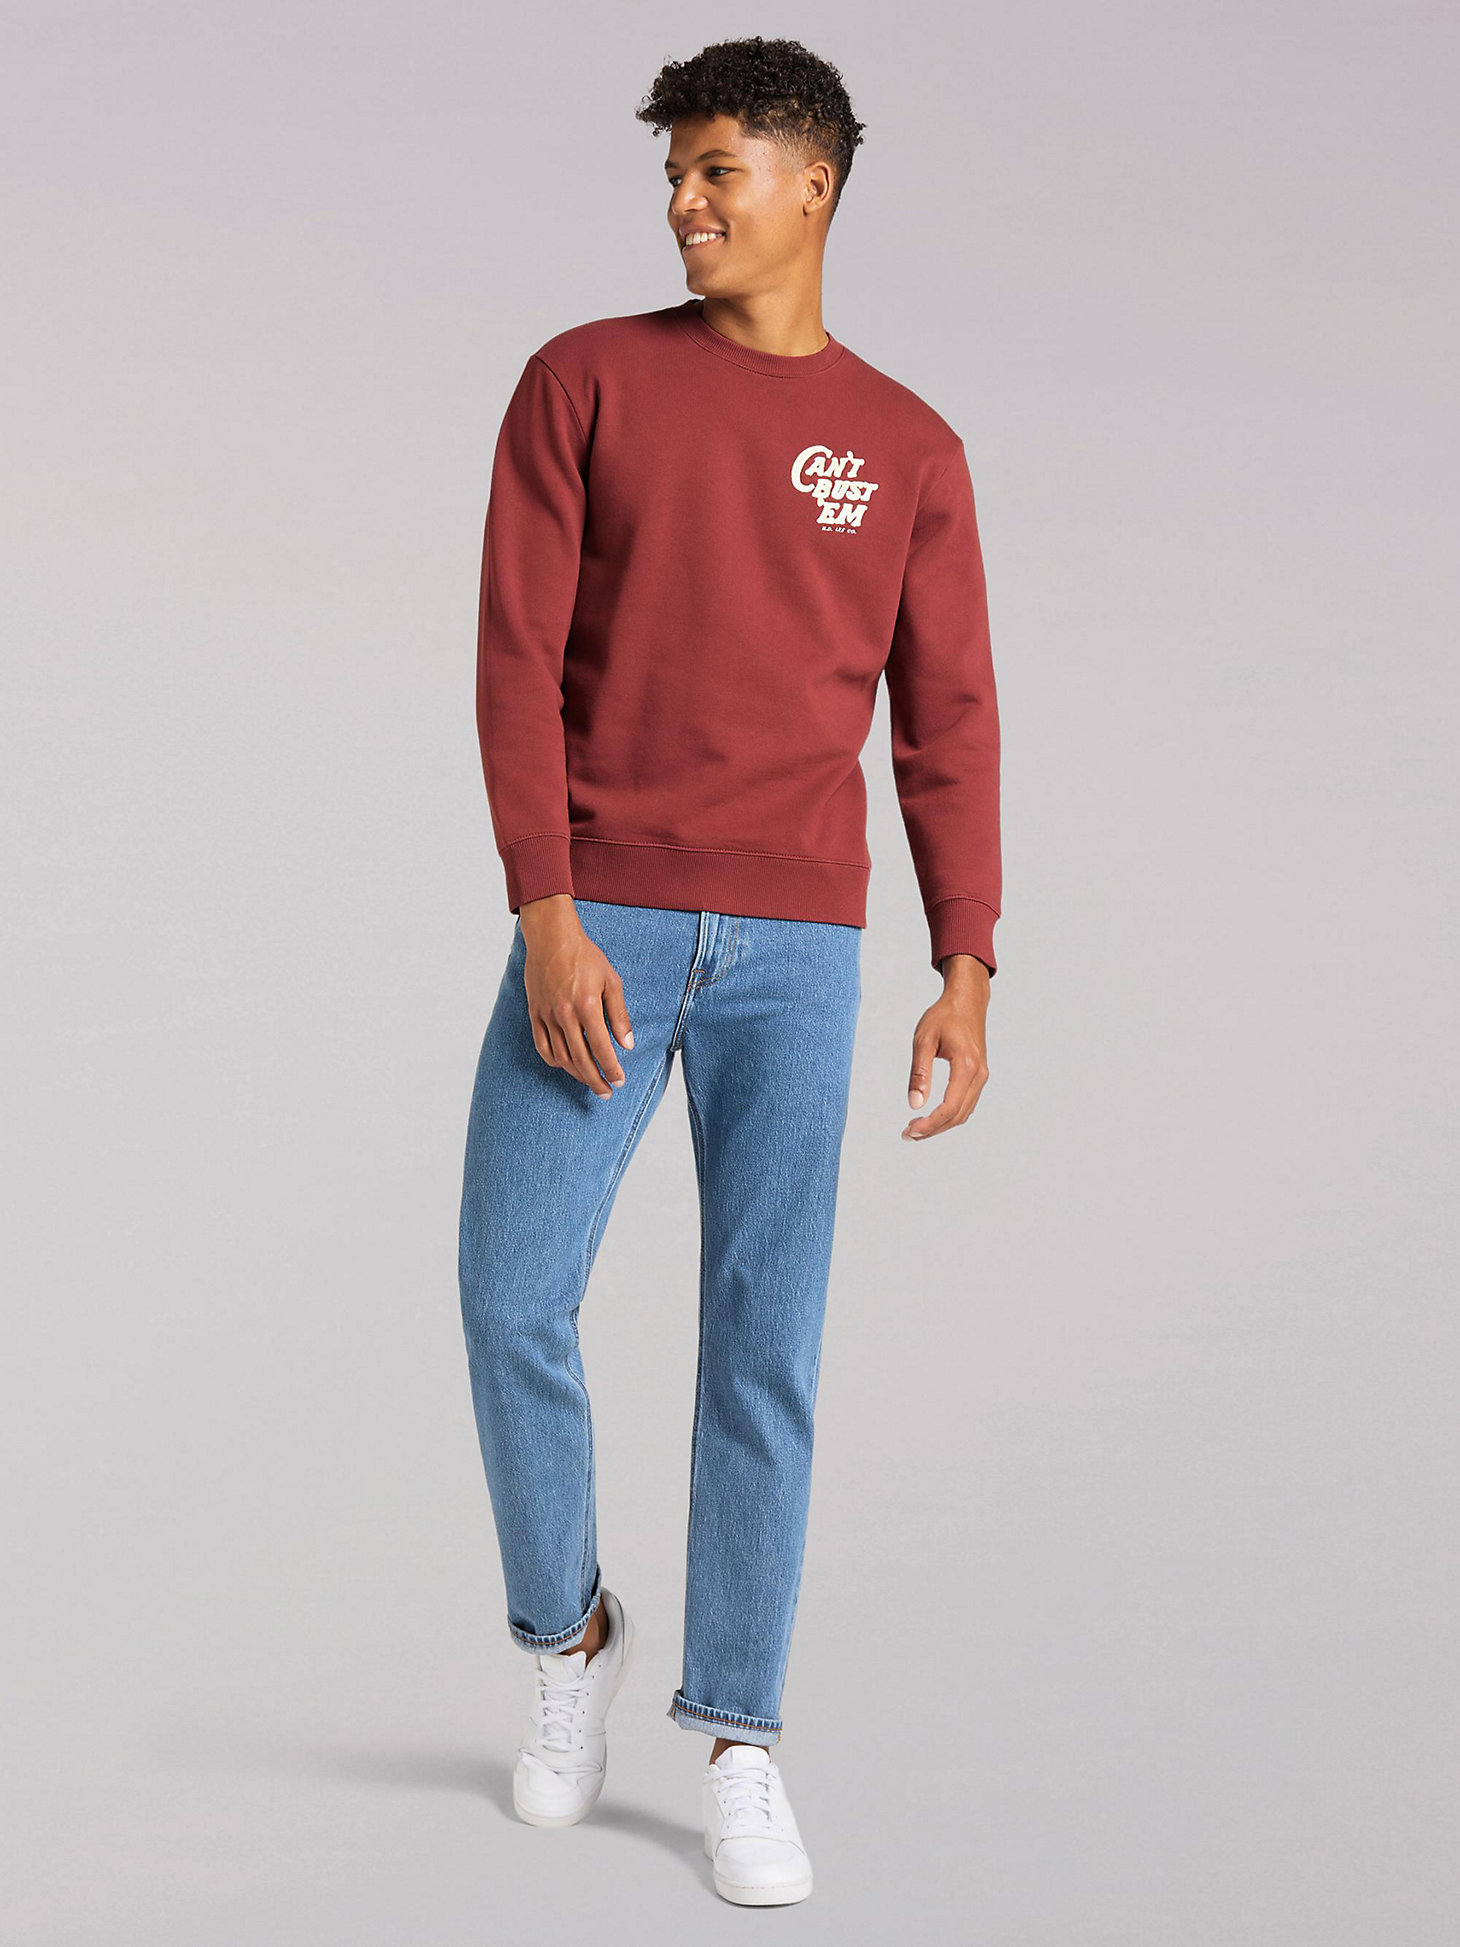 Men's Lee European Collection Can't Bust 'Em Rooster Sweatshirt in Fired Brick alternative view 4